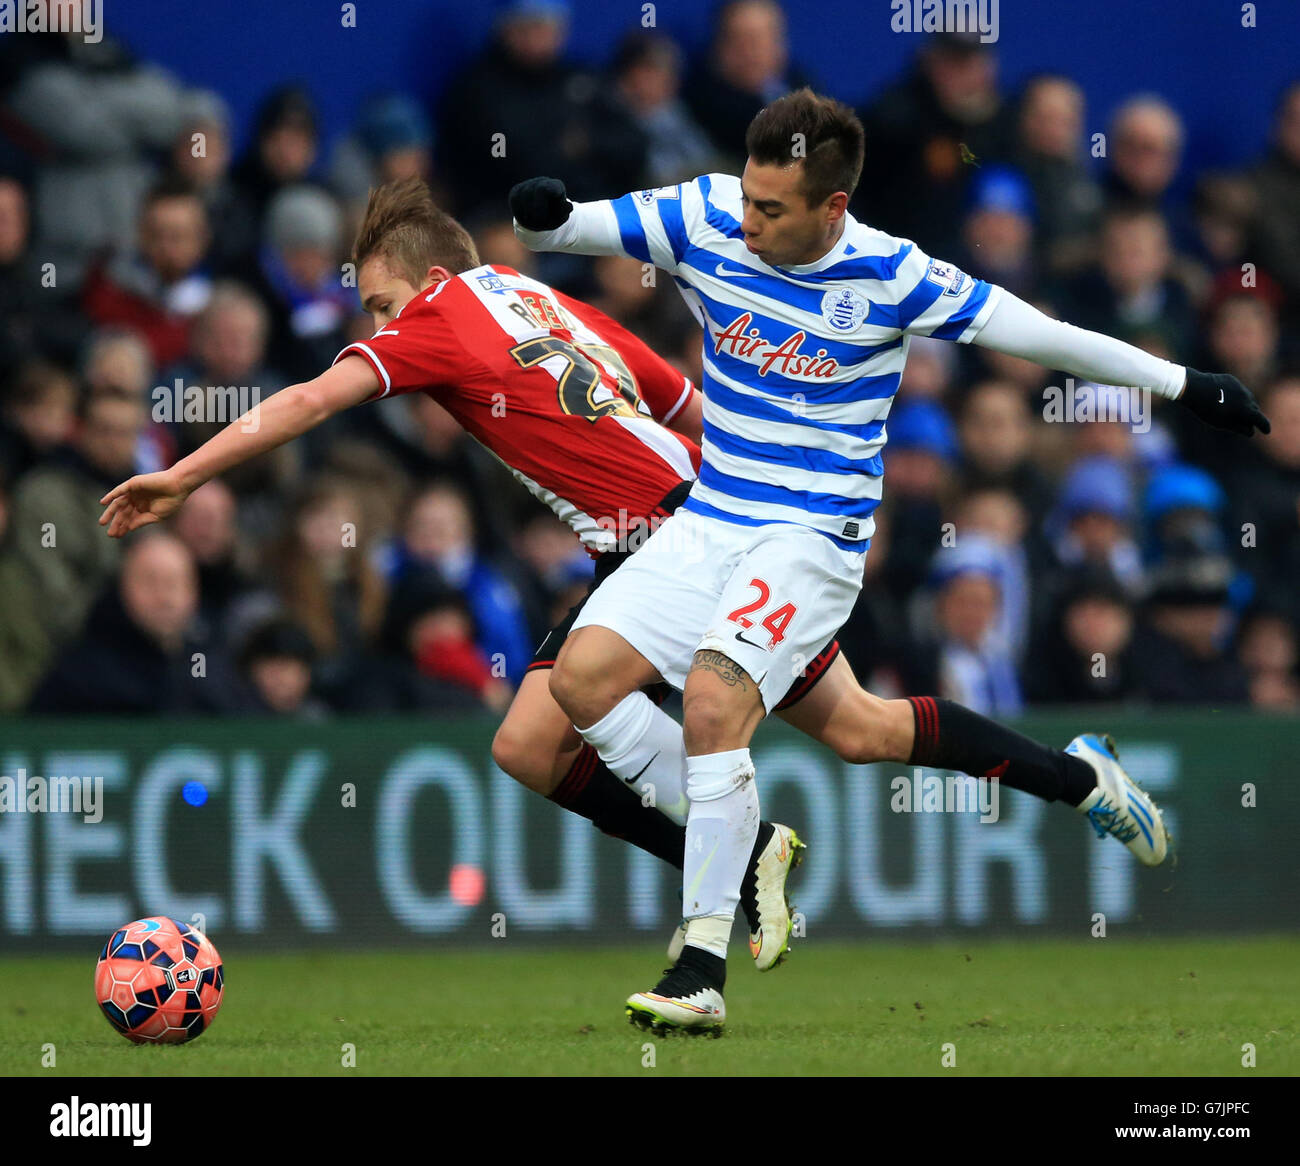 Queens Park Rangers' Eduardo Vargas (right) and Sheffield United's Lois Reed battles for the ball during the FA Cup, Third Round match at Loftus Road, London. Stock Photo